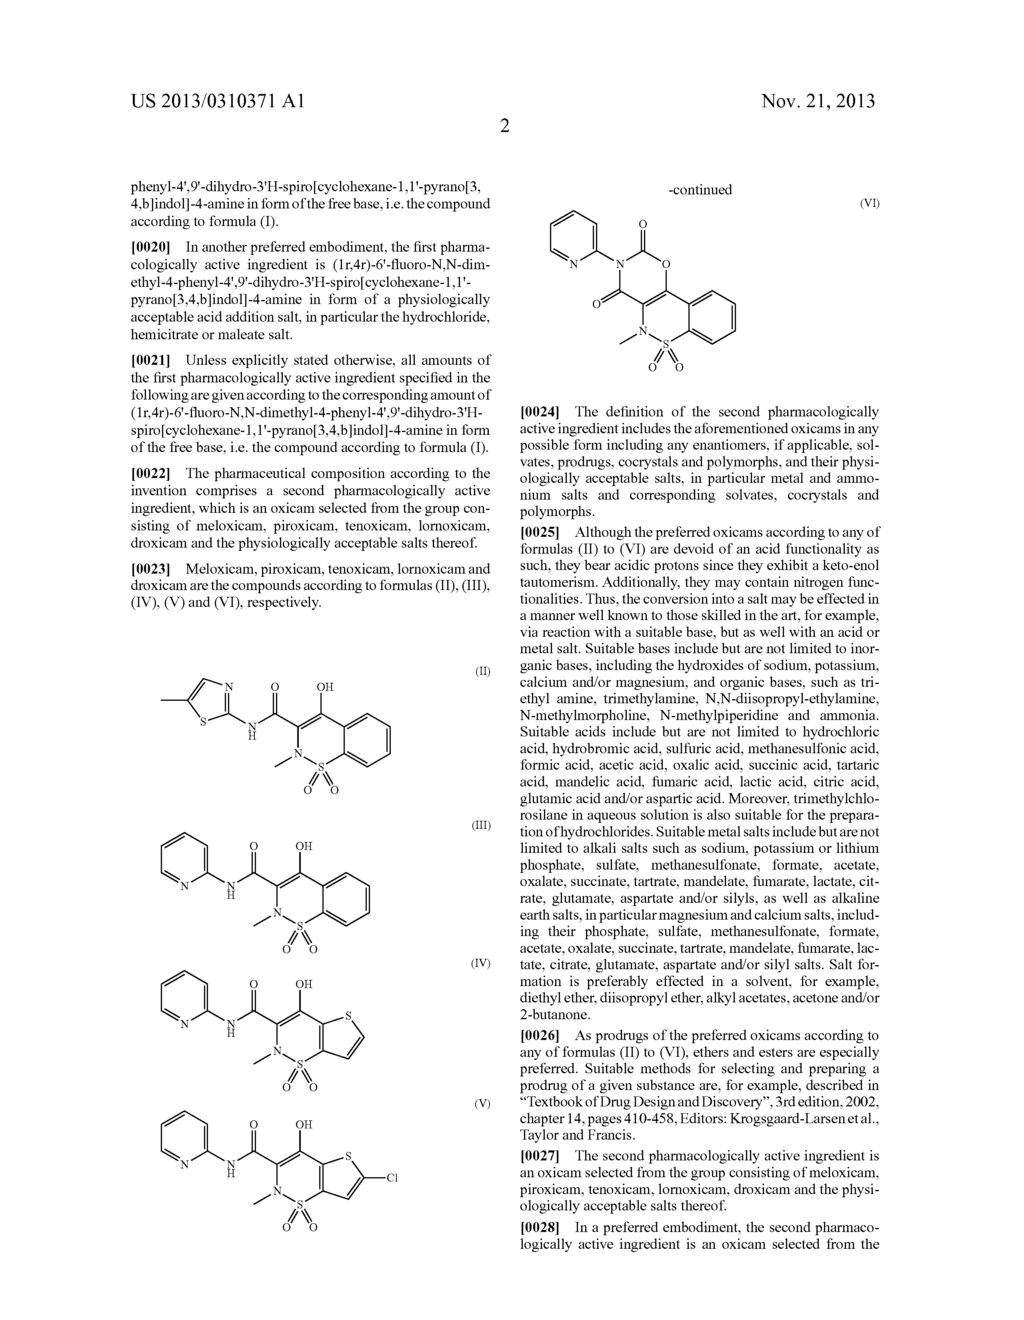 Pharmaceutical composition comprising     (1r,4r)-6'-fluoro-N,N-dimethyl-4-phenyl-4',9'-dihydro-3'H-spiro[cyclohexa-    ne-1,1'-pyrano-[3,4,b]indol]-4-amine and an oxicam - diagram, schematic, and image 08